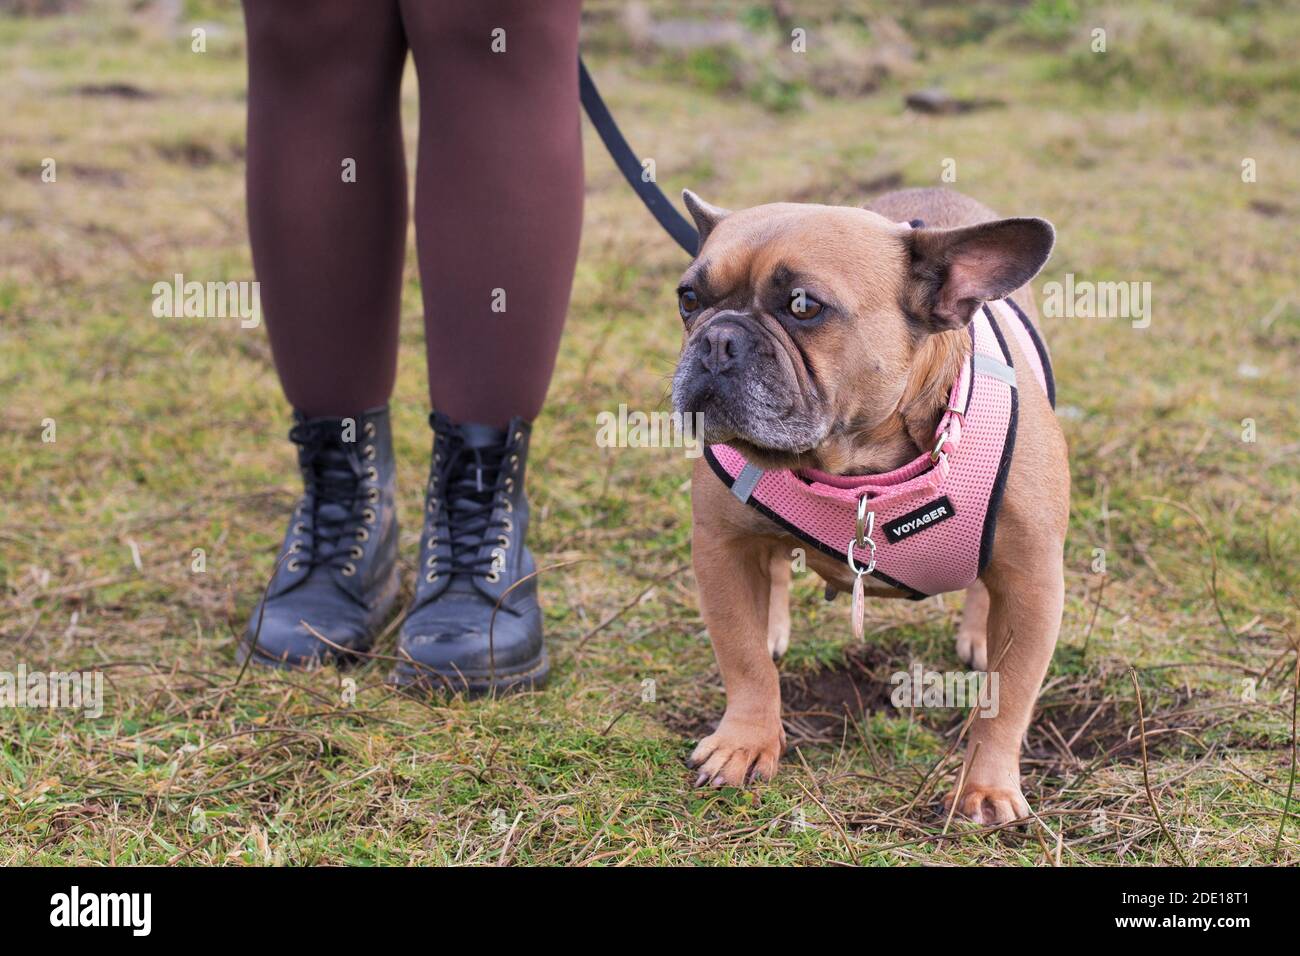 A french bulldog standing next to a woman wearing tights and boots. Stock Photo